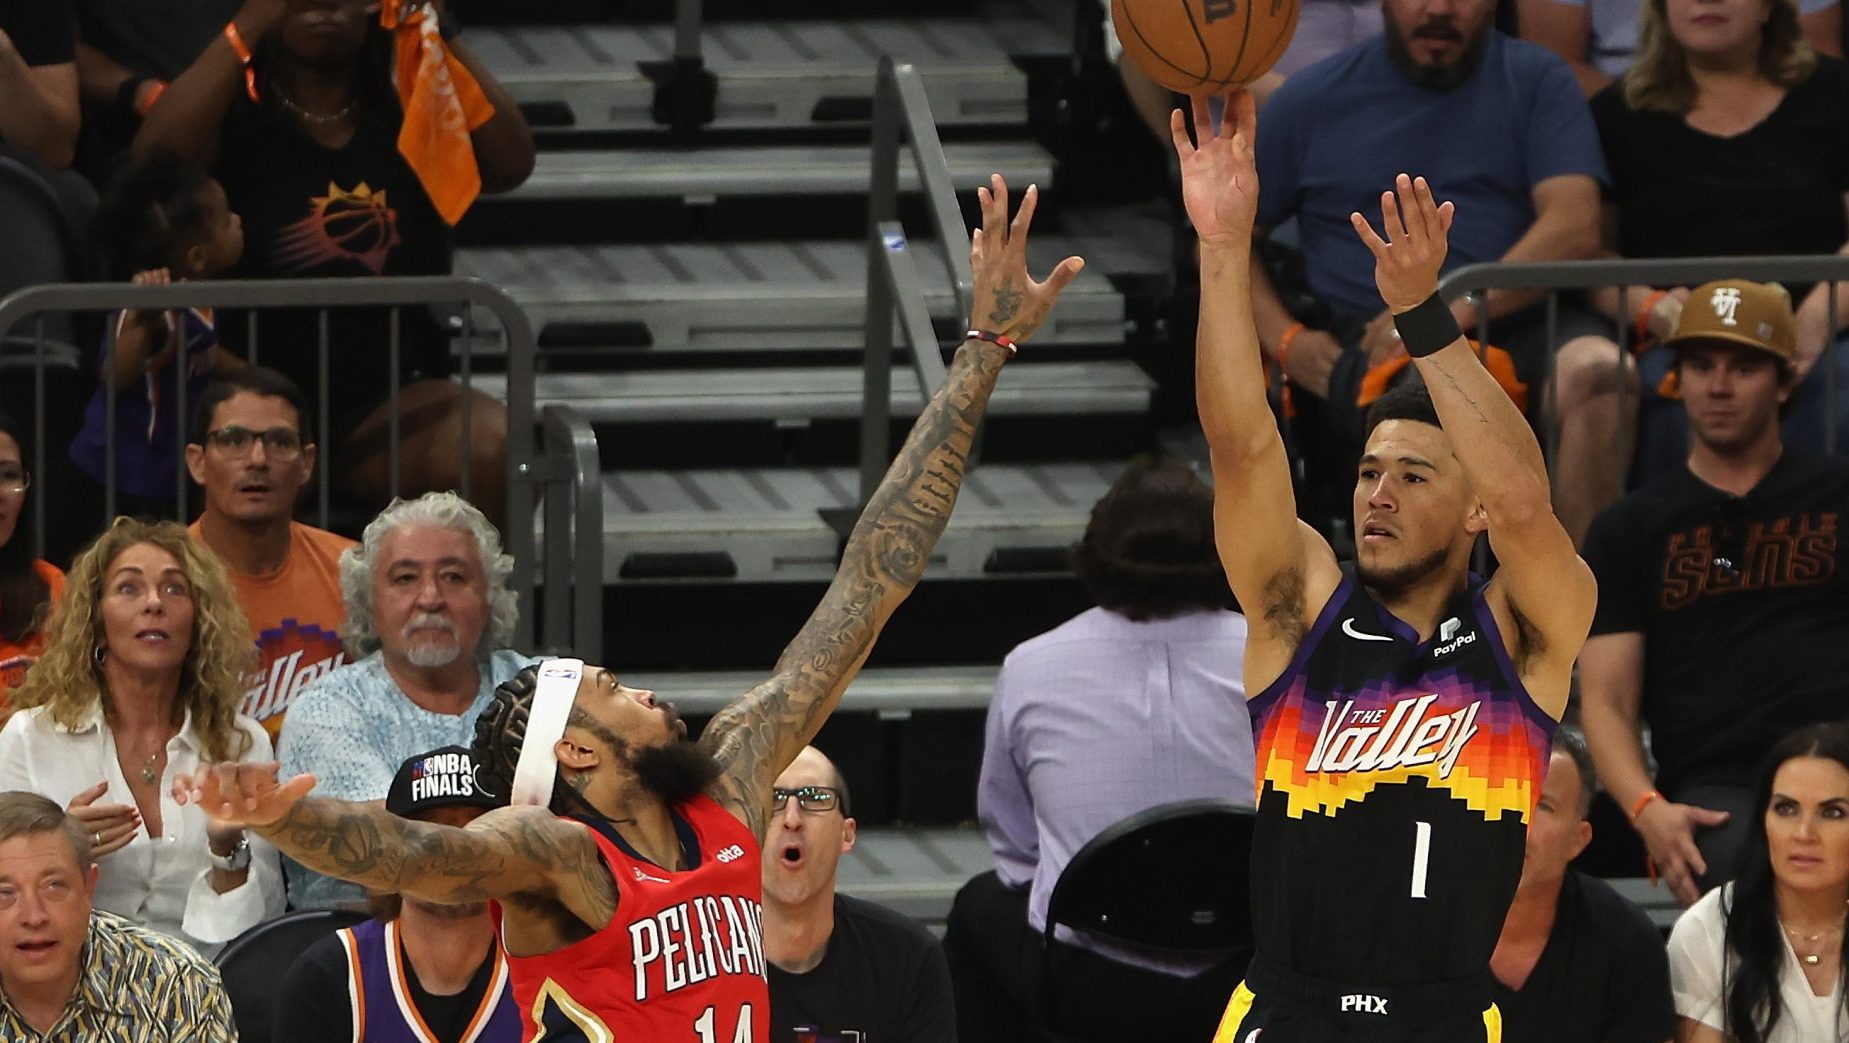 Devin Booker #1 of the Phoenix Suns attempts a shot over Brandon Ingram #14 of the New Orleans Peli...